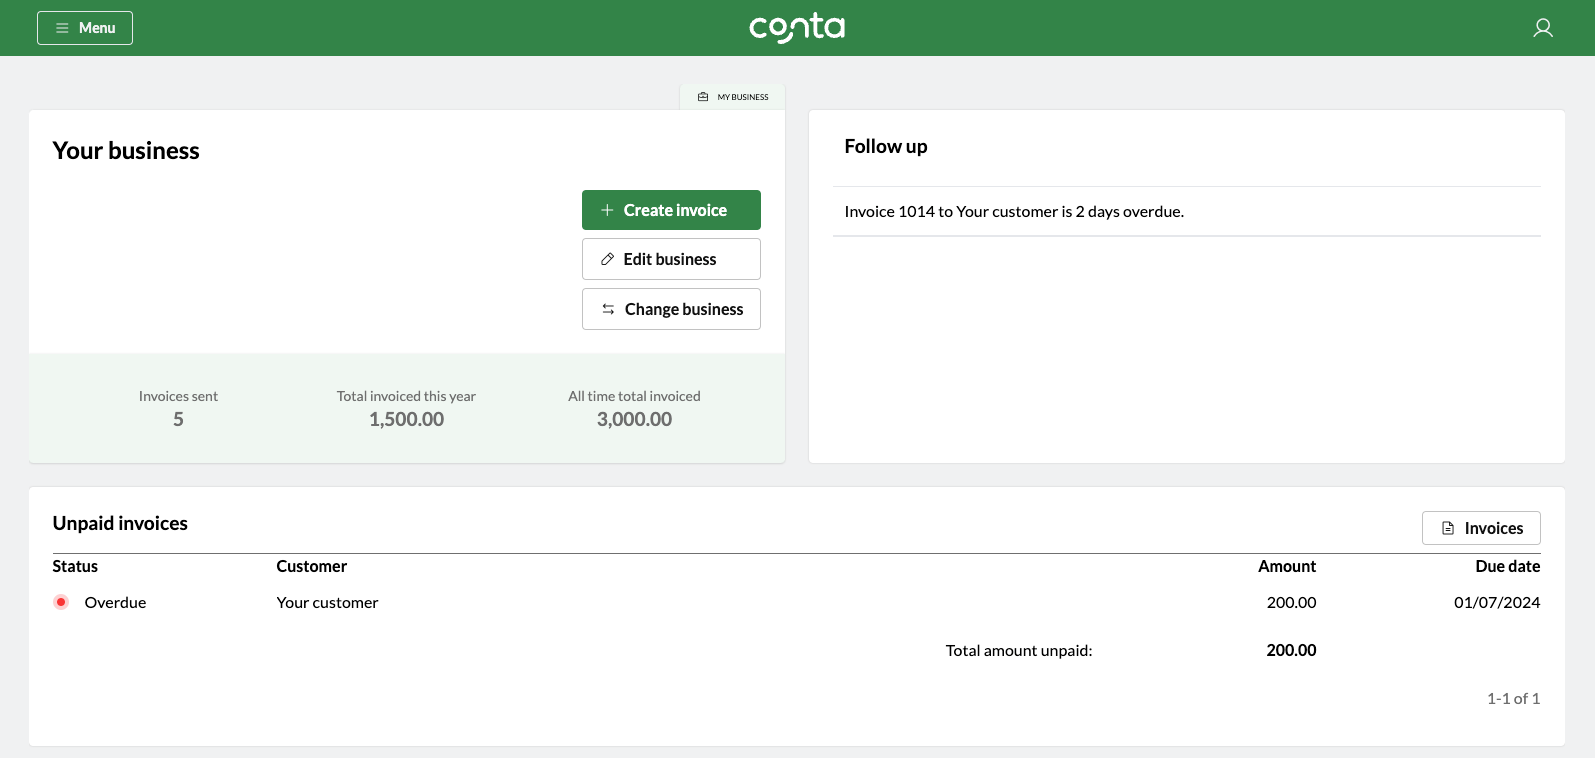 The Conta homepage showing an overdue invoice